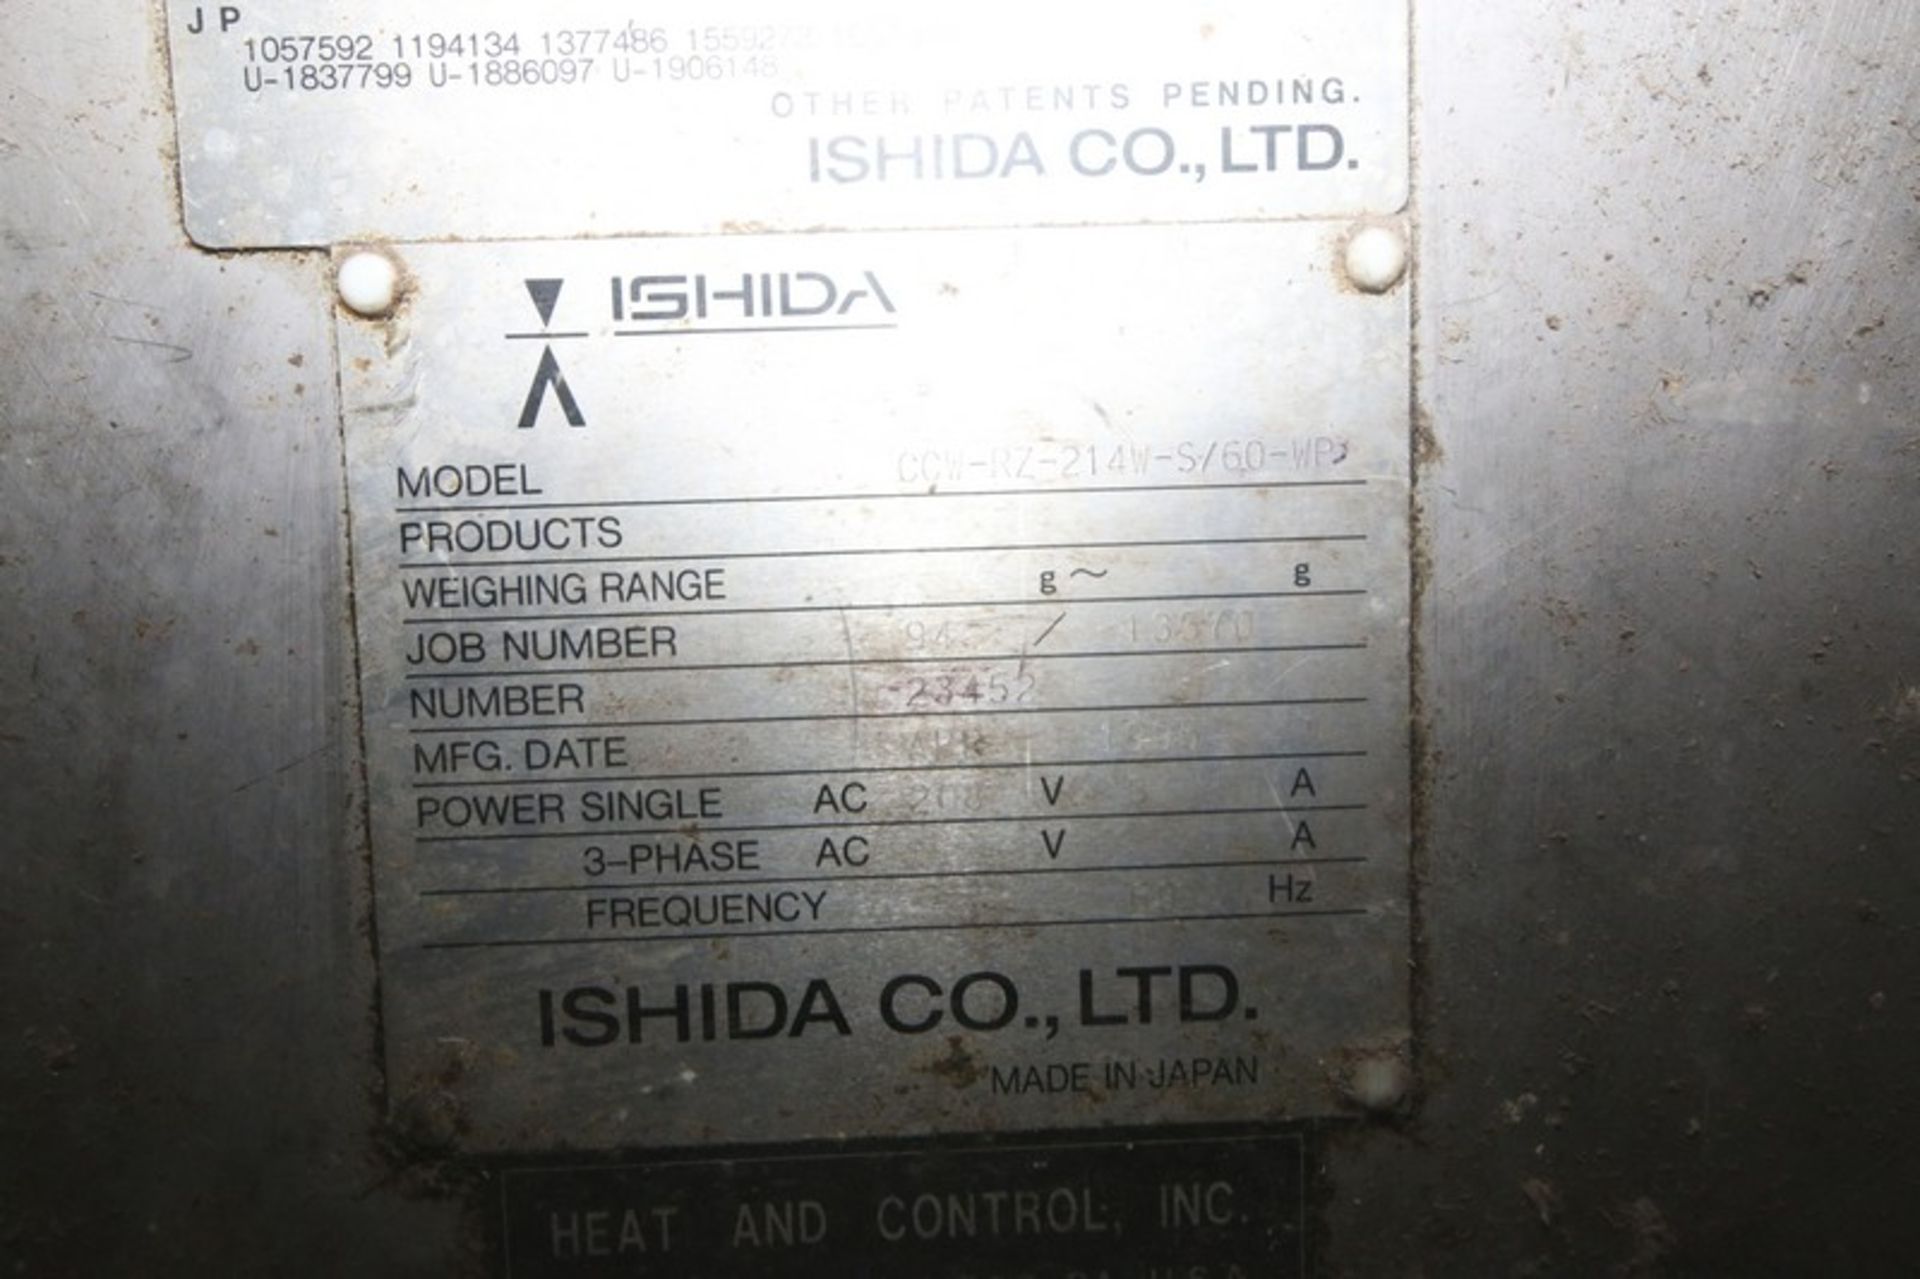 Ishida 14-Head Rotary Combination Weigh Scale, M/N CCW-RZ-214W-S/60, with S/S Chutes & Buckets, - Image 5 of 11